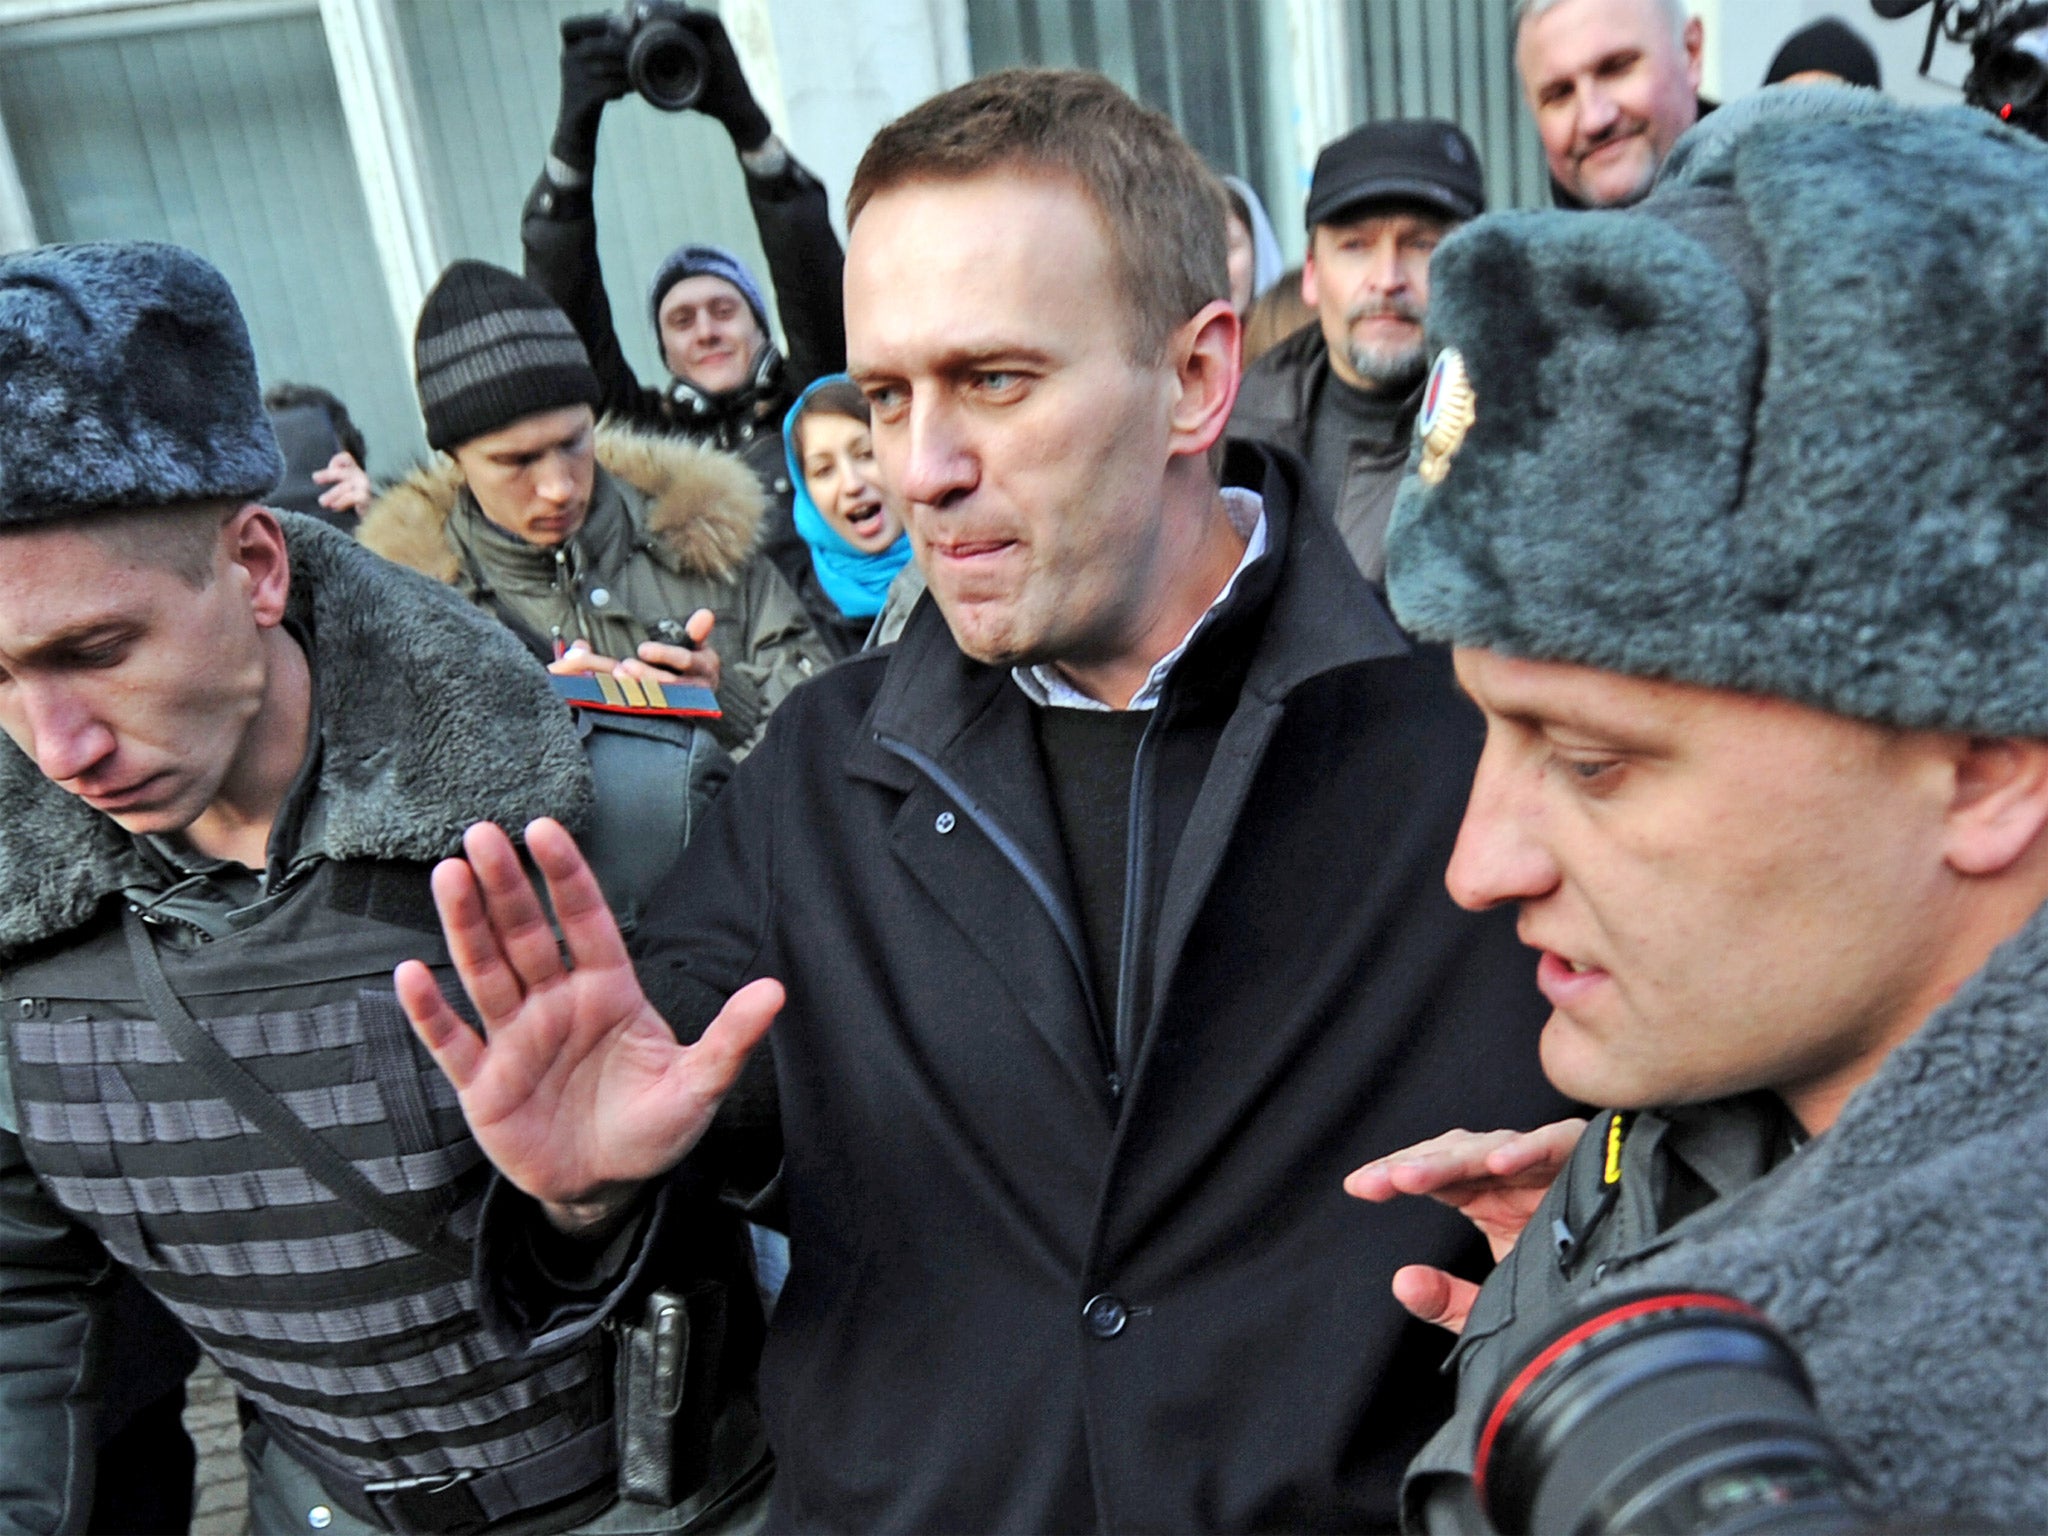 Alexei Navalny has won support among Russians tired of official corruption